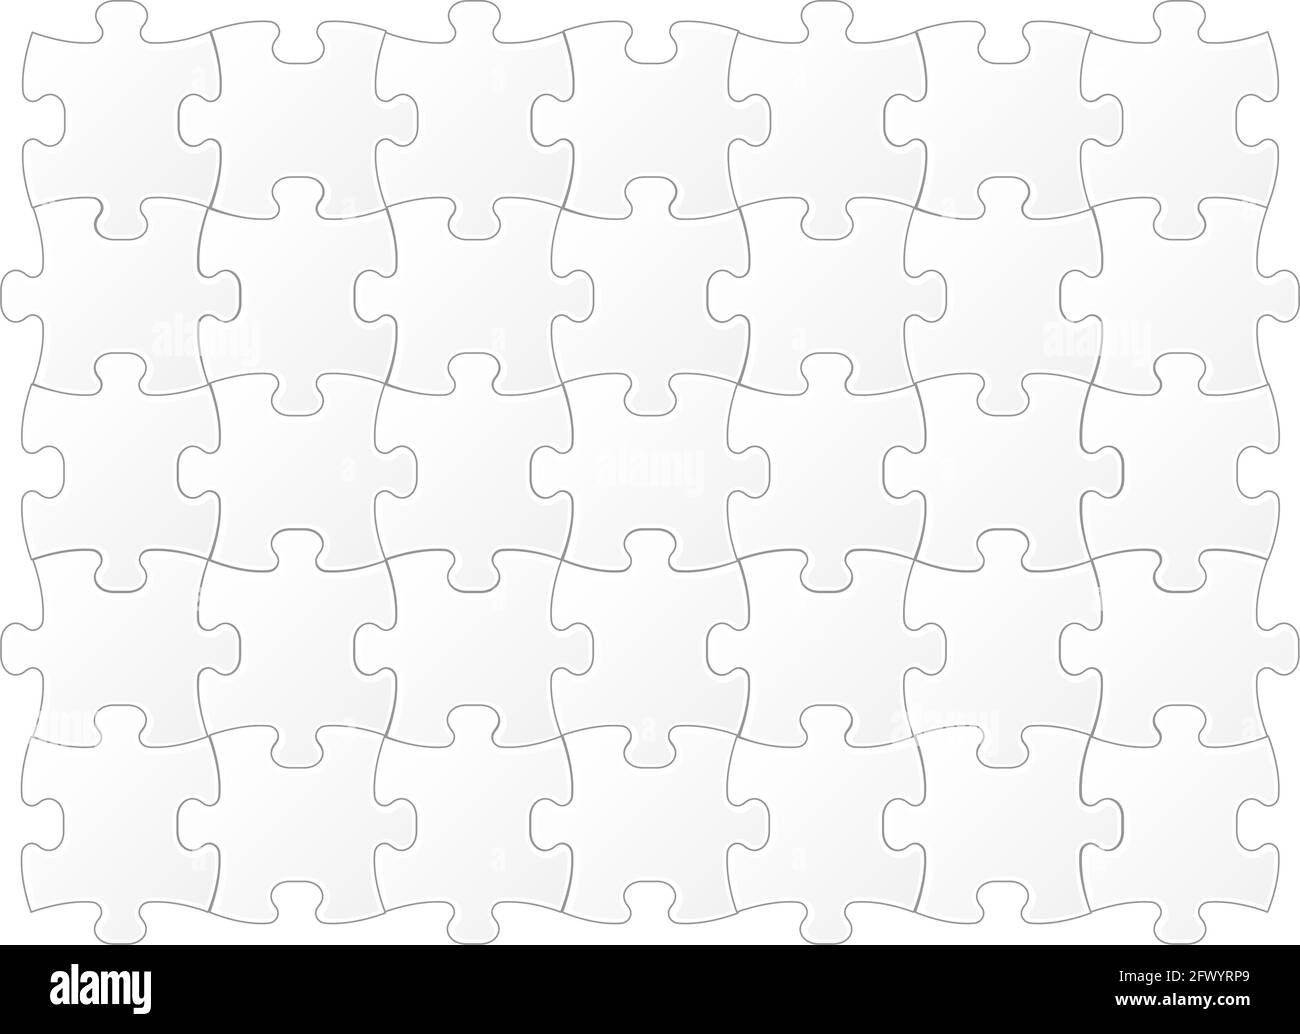 Jigsaw puzzle template vector illustration Stock Vector